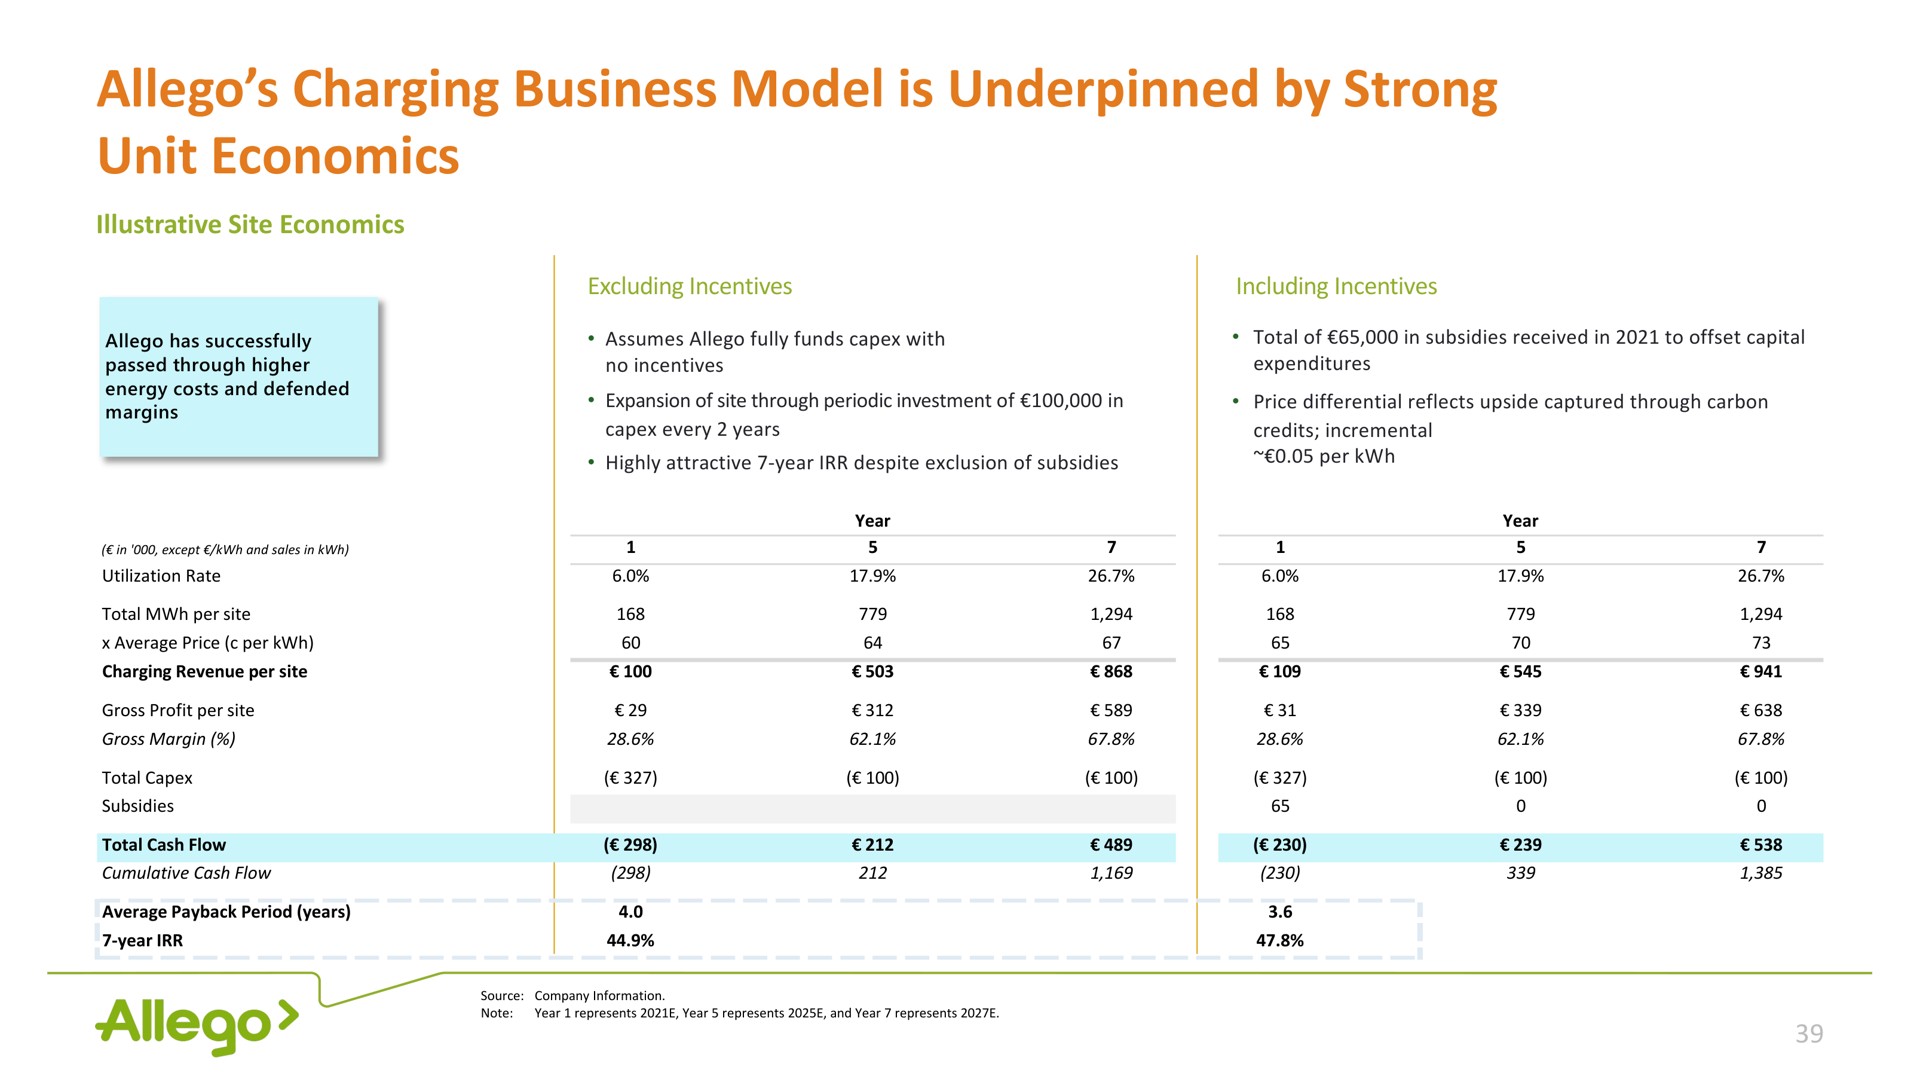 charging business model is underpinned by strong unit economics | Allego